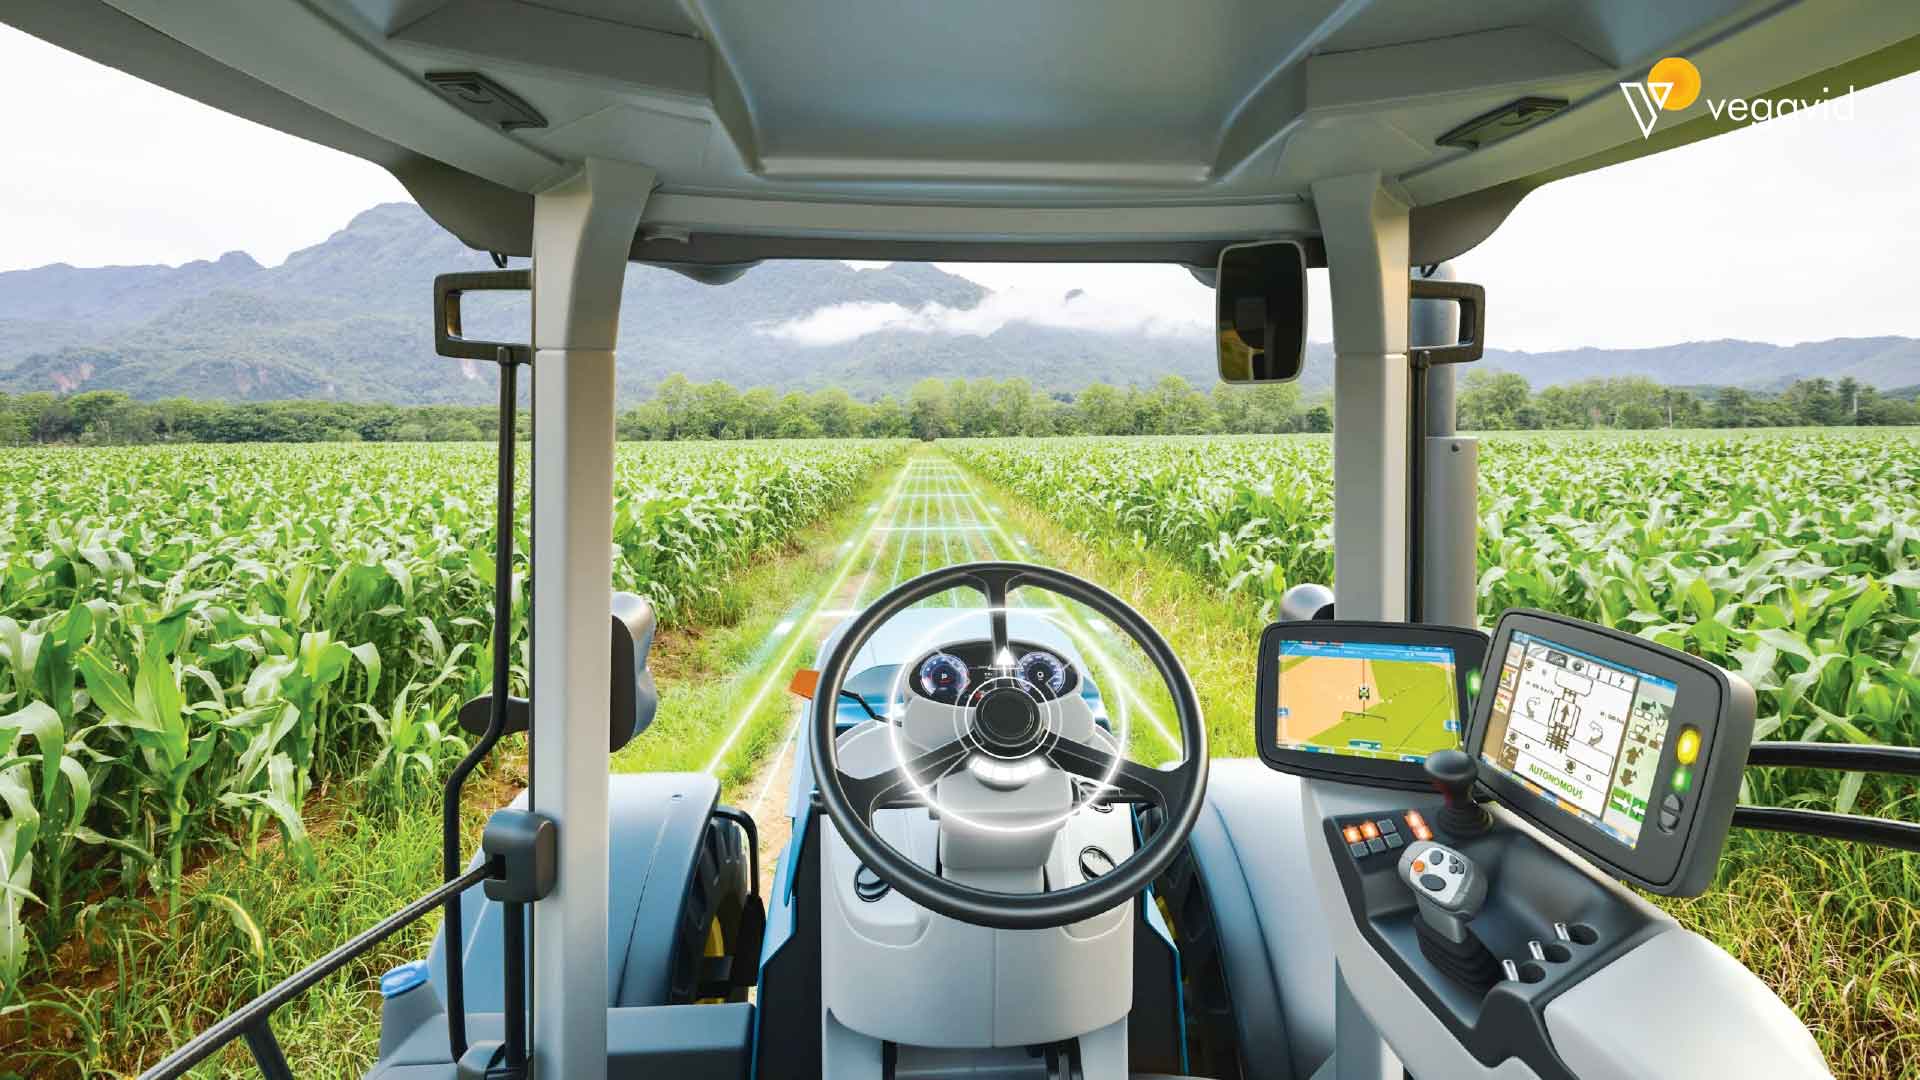 Will a smart sprayer pay off on your farm?